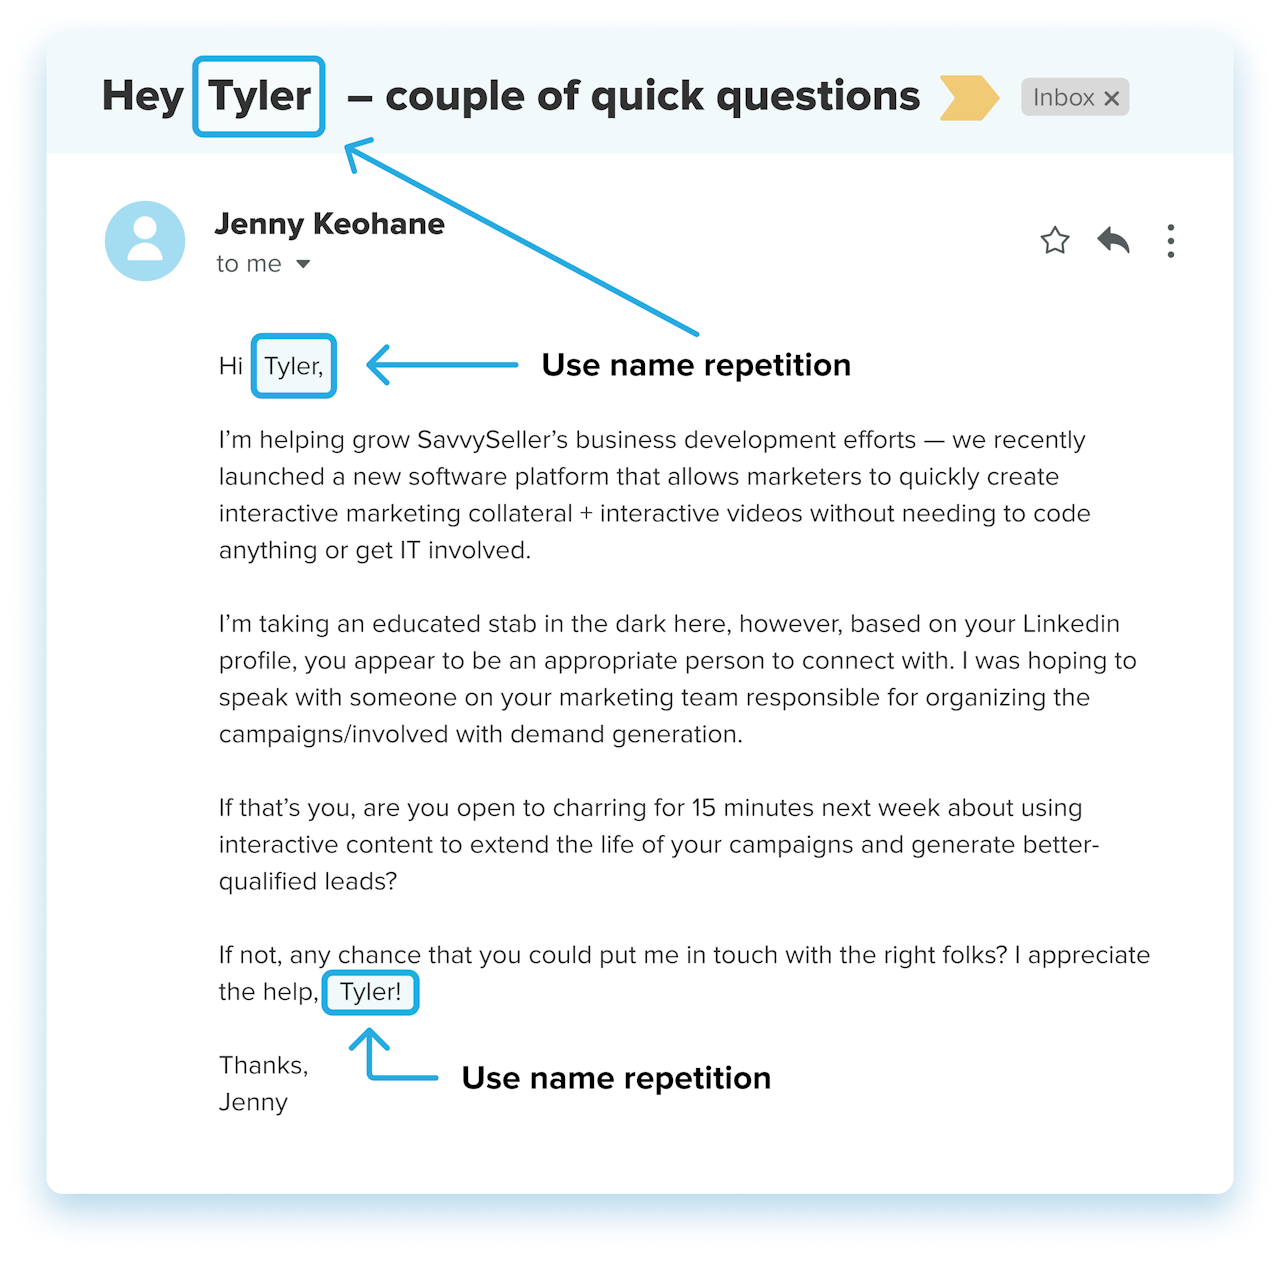 personalized email example: use name repetition